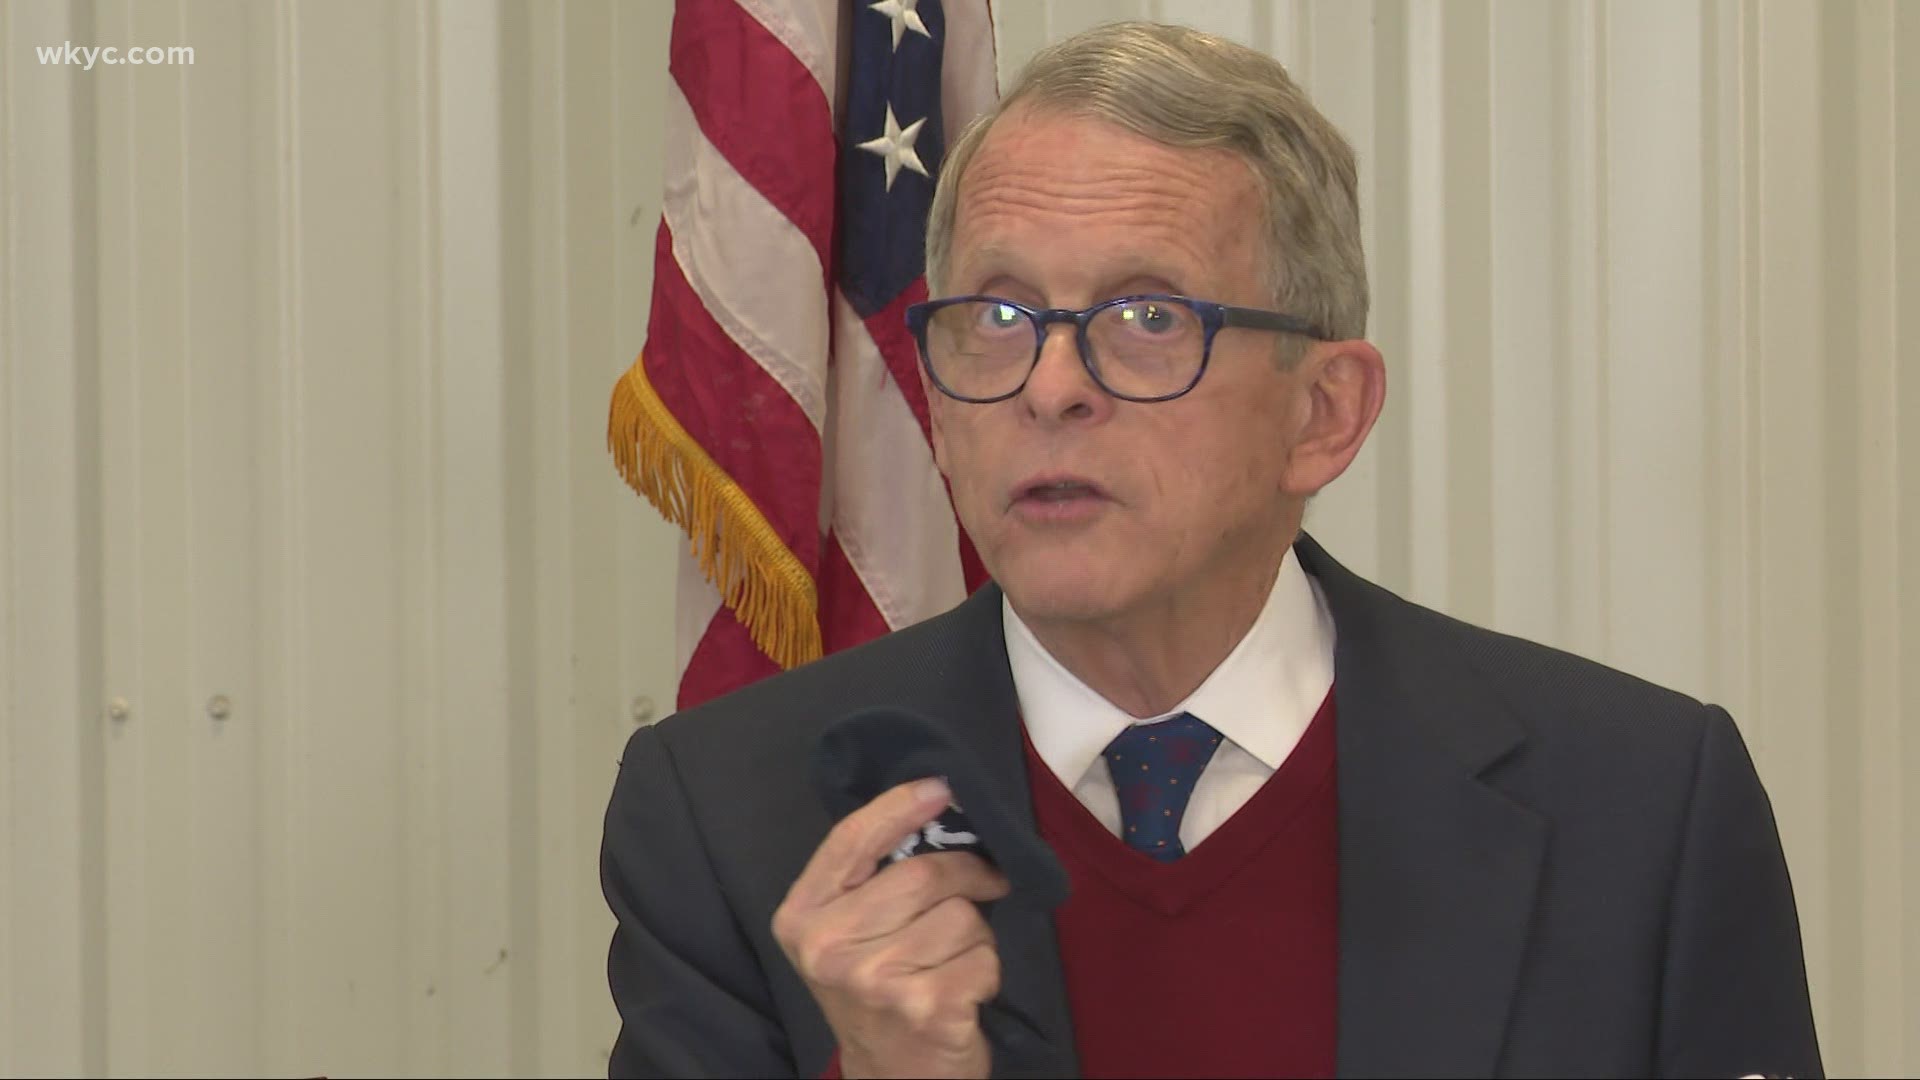 DeWine says he doesn't want the state of Ohio to go through another shutdown, but will not rule it out. Mark Naymik has more from the governor's COVID-19 speech.